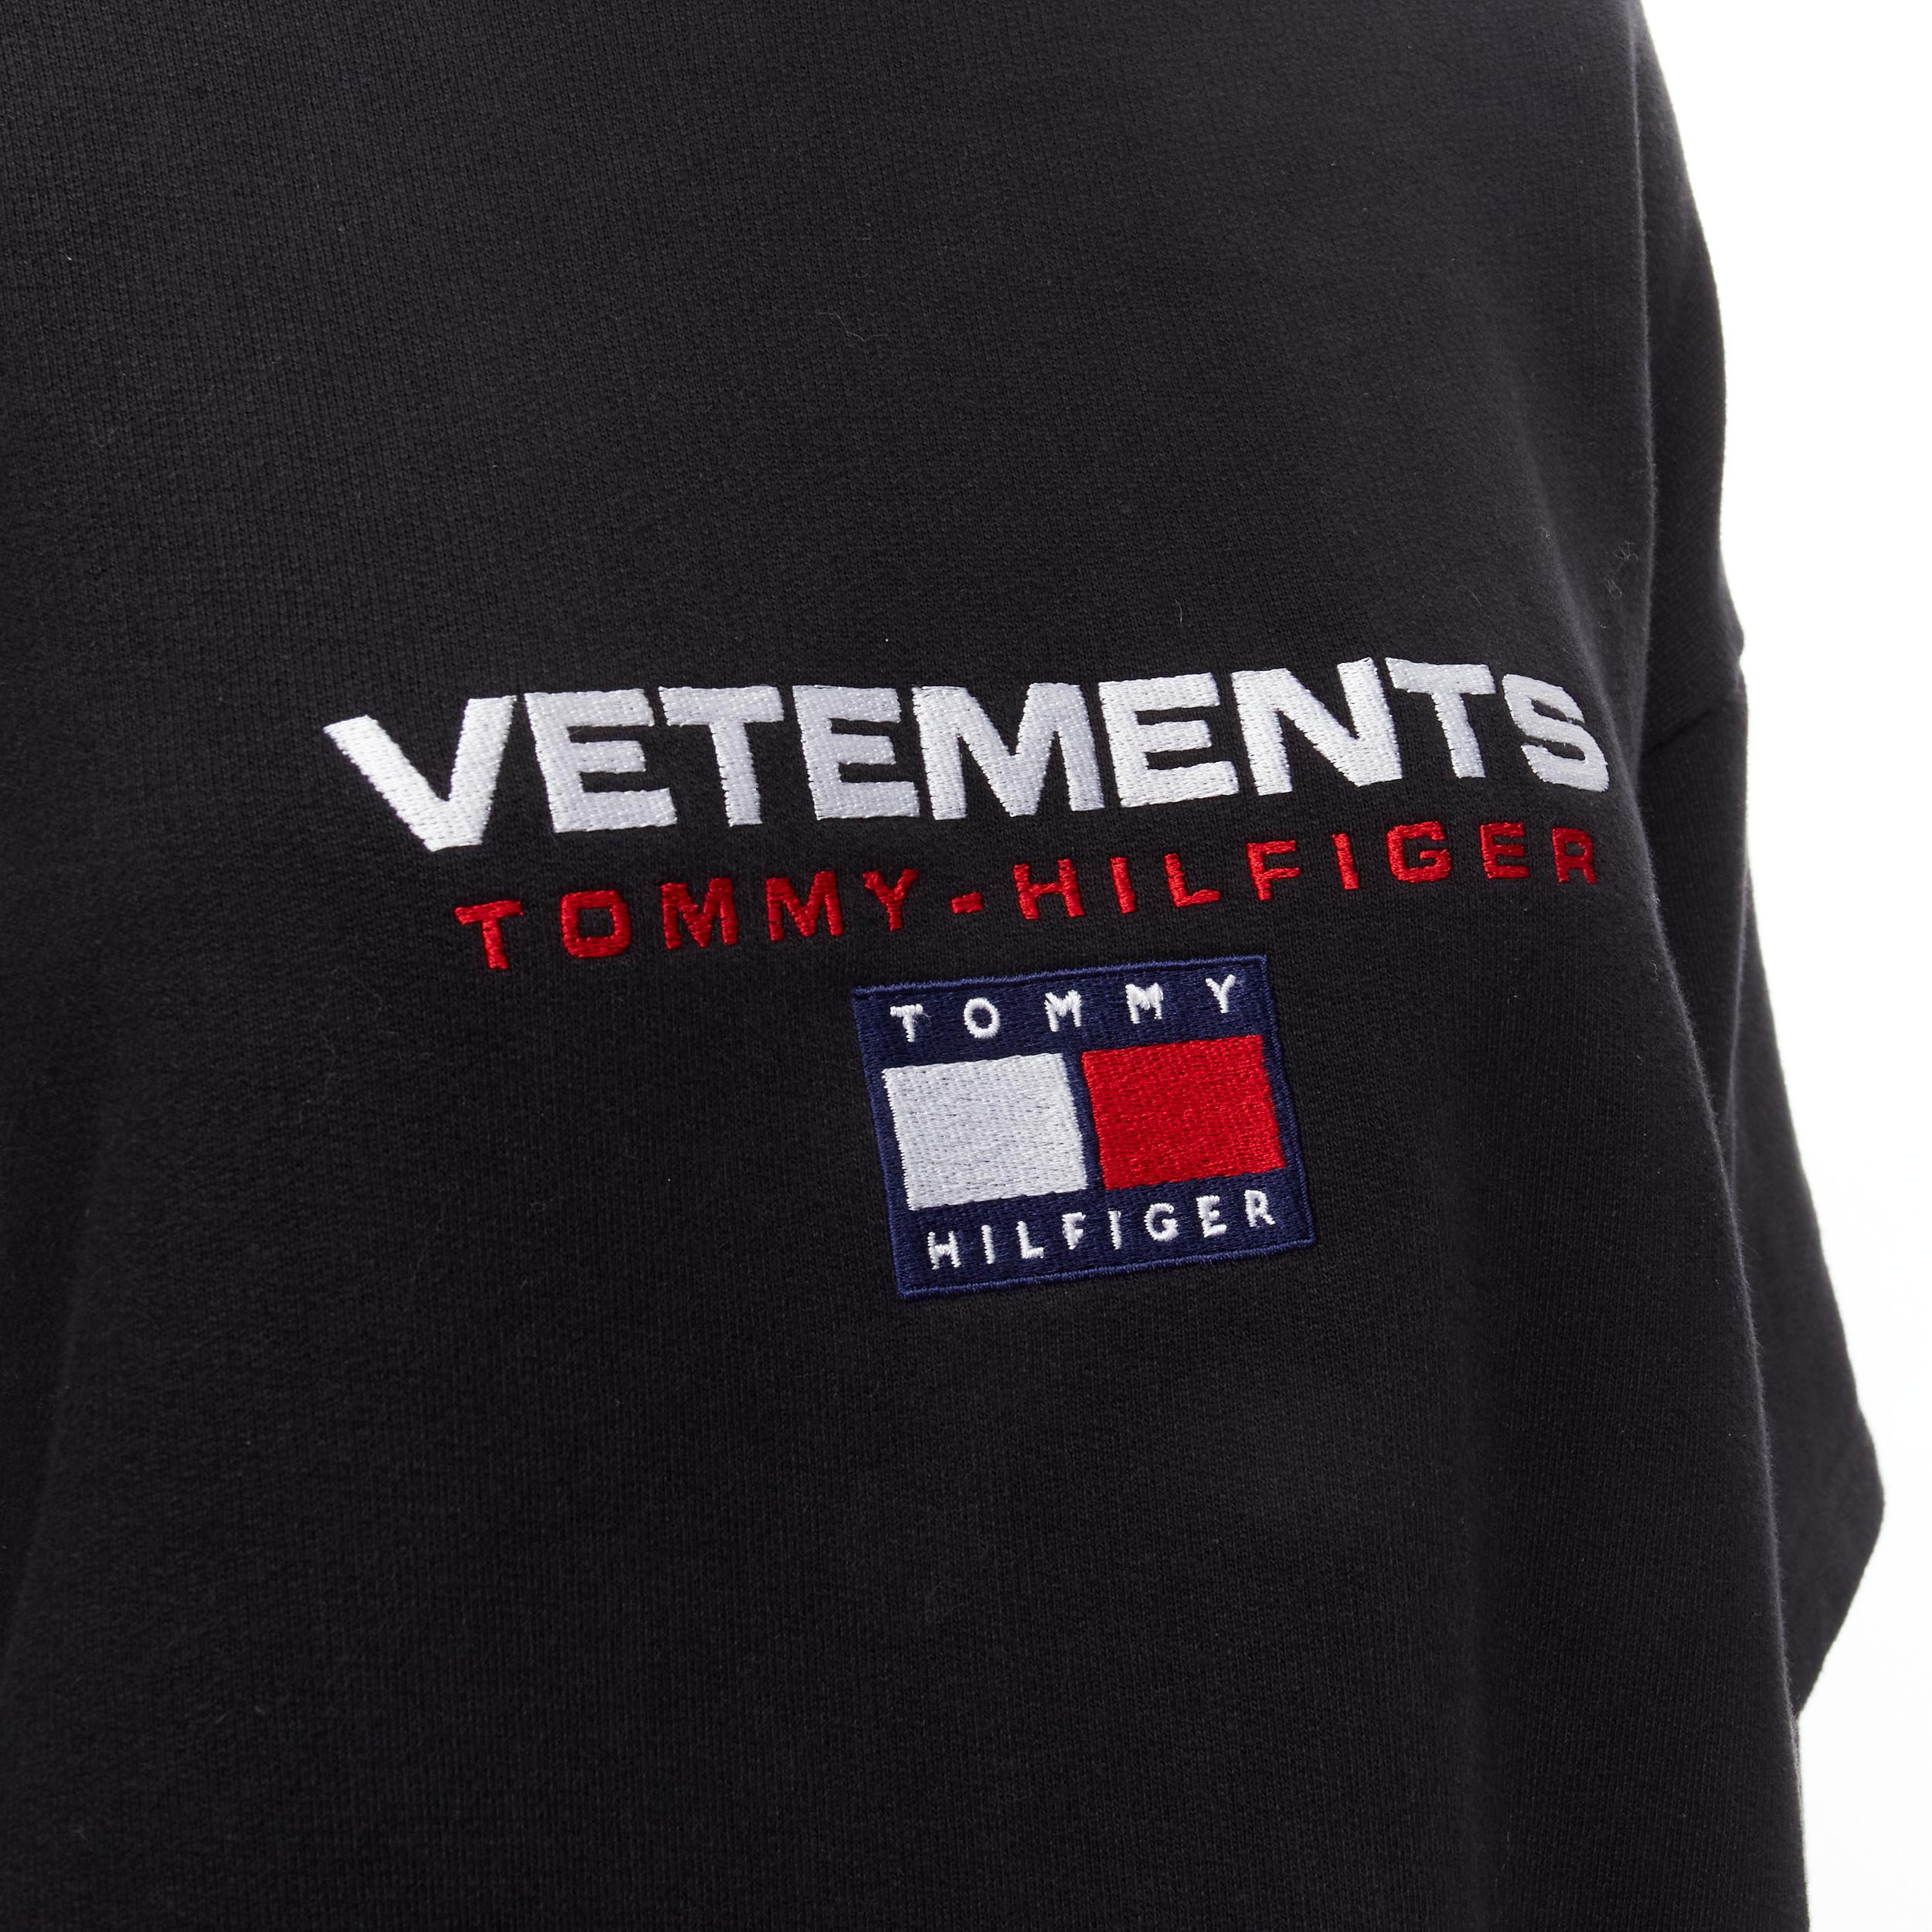 VETEMENTS TOMMY HILFIGER Demna 2018 black double sleeve oversized hoodie XS
Reference: TGAS/B02238
Brand: Vetements
Designer: Demna
Material: Cotton
Color: Black
Pattern: Solid
Made in: Portugal

CONDITION:
Condition: Excellent, this item was